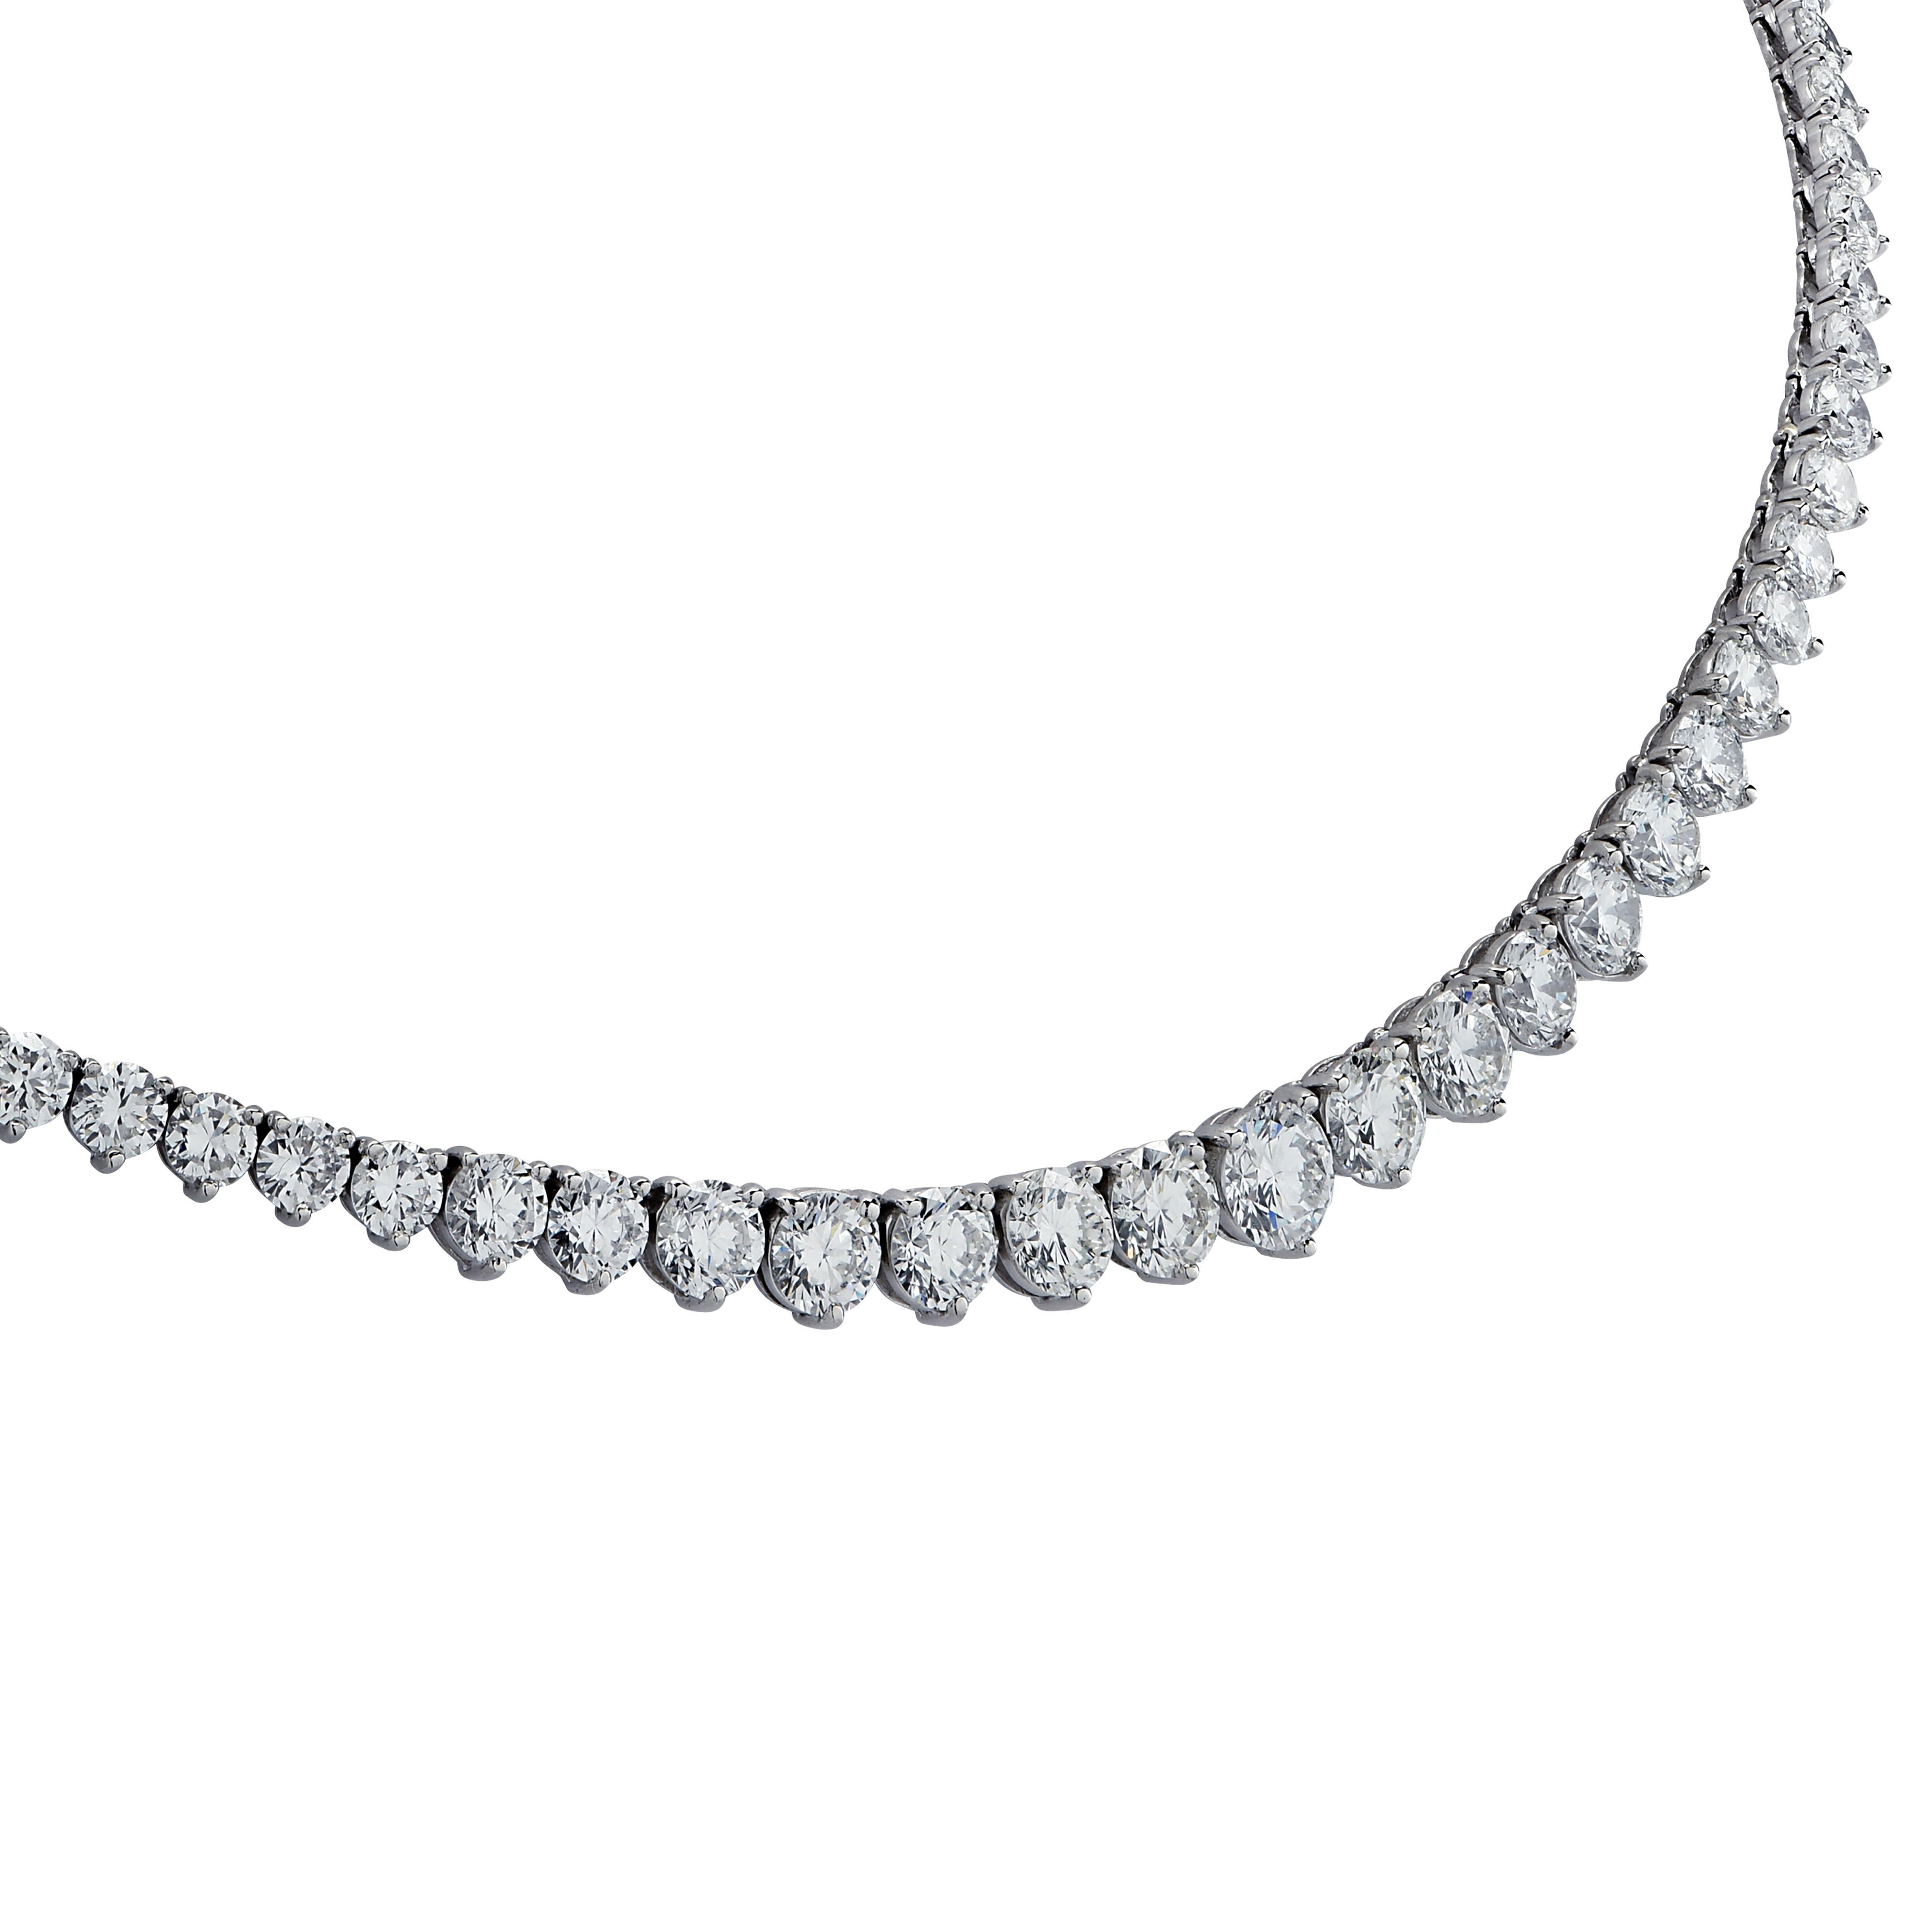 Exquisite diamond riviere necklace crafted in platinum, showcasing 119 round brilliant cut diamonds weighing approximately 18 carats total, D-G color, VS-SI Clarity. Some of the diamonds are GIA certified. The graduating diamonds are set in a